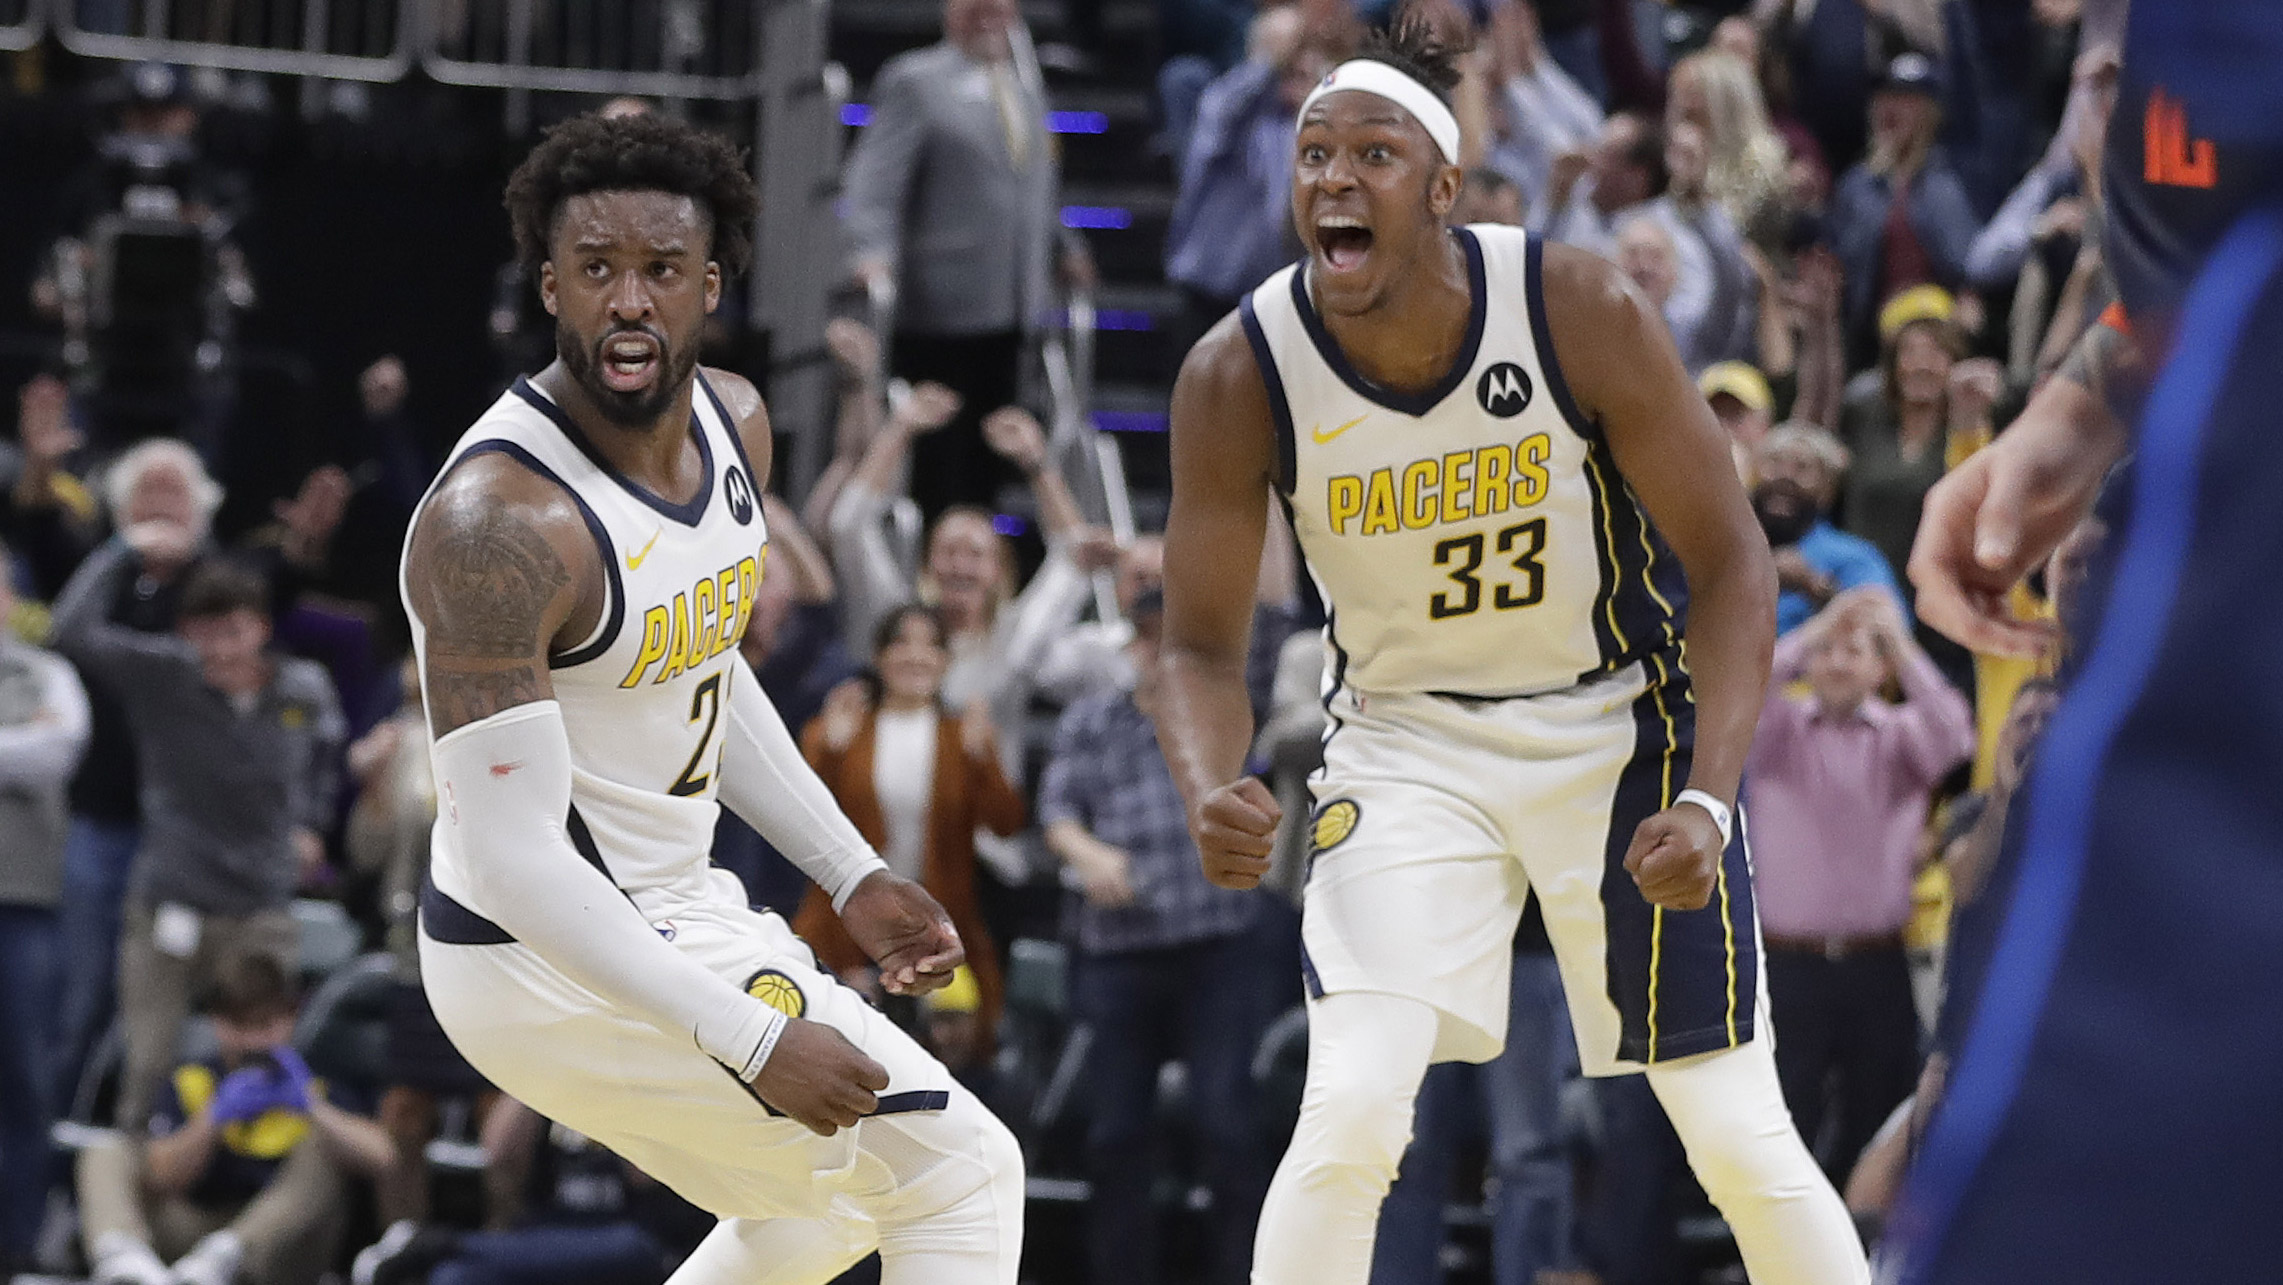 Pacers pull off wild fourth-quarter comeback in 108-106 win over Thunder